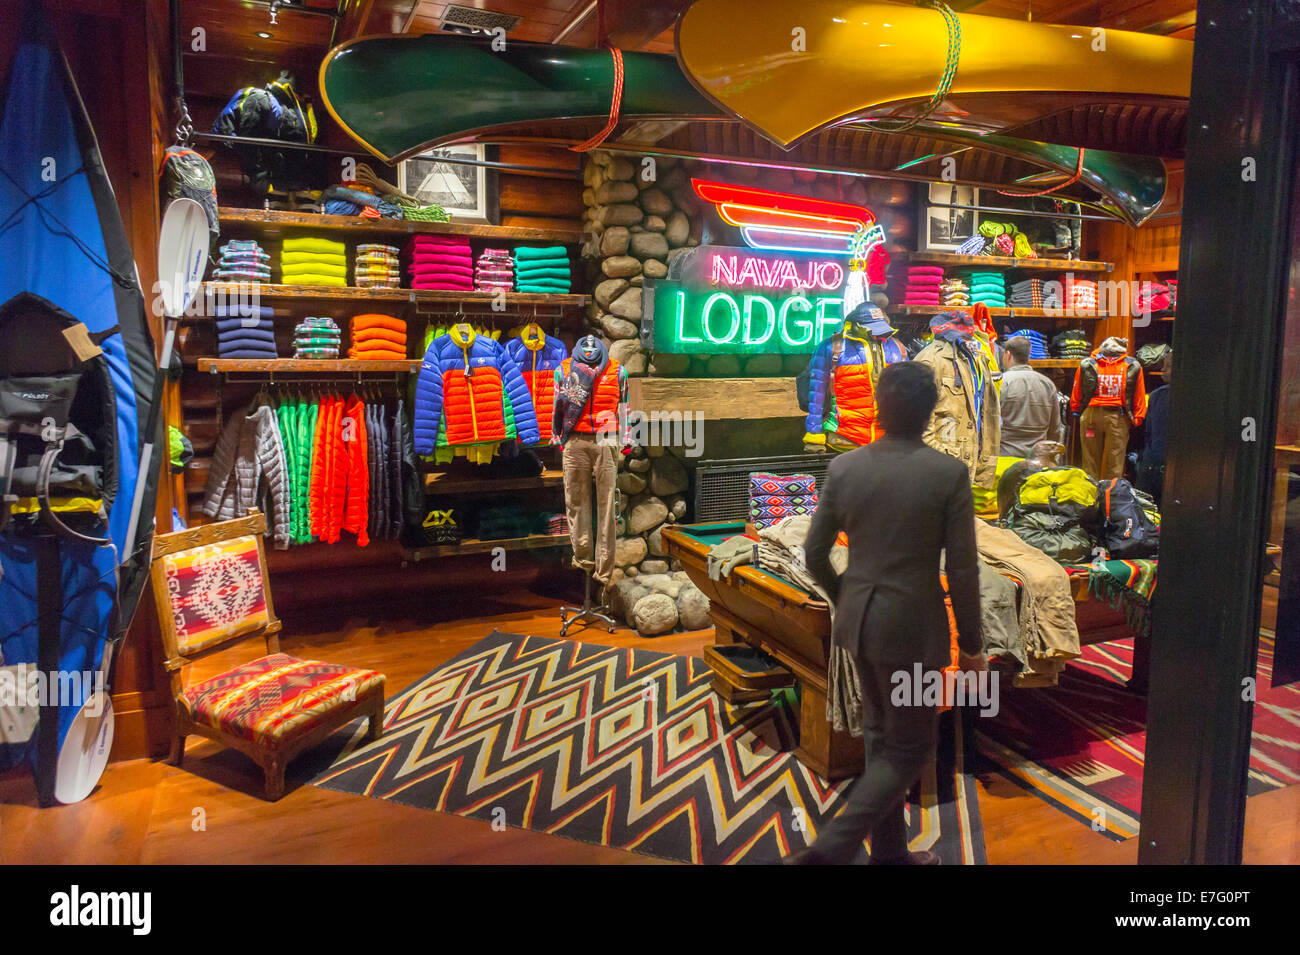 The brand new Polo Ralph Lauren store of Fifth Avenue in New York Stock  Photo - Alamy